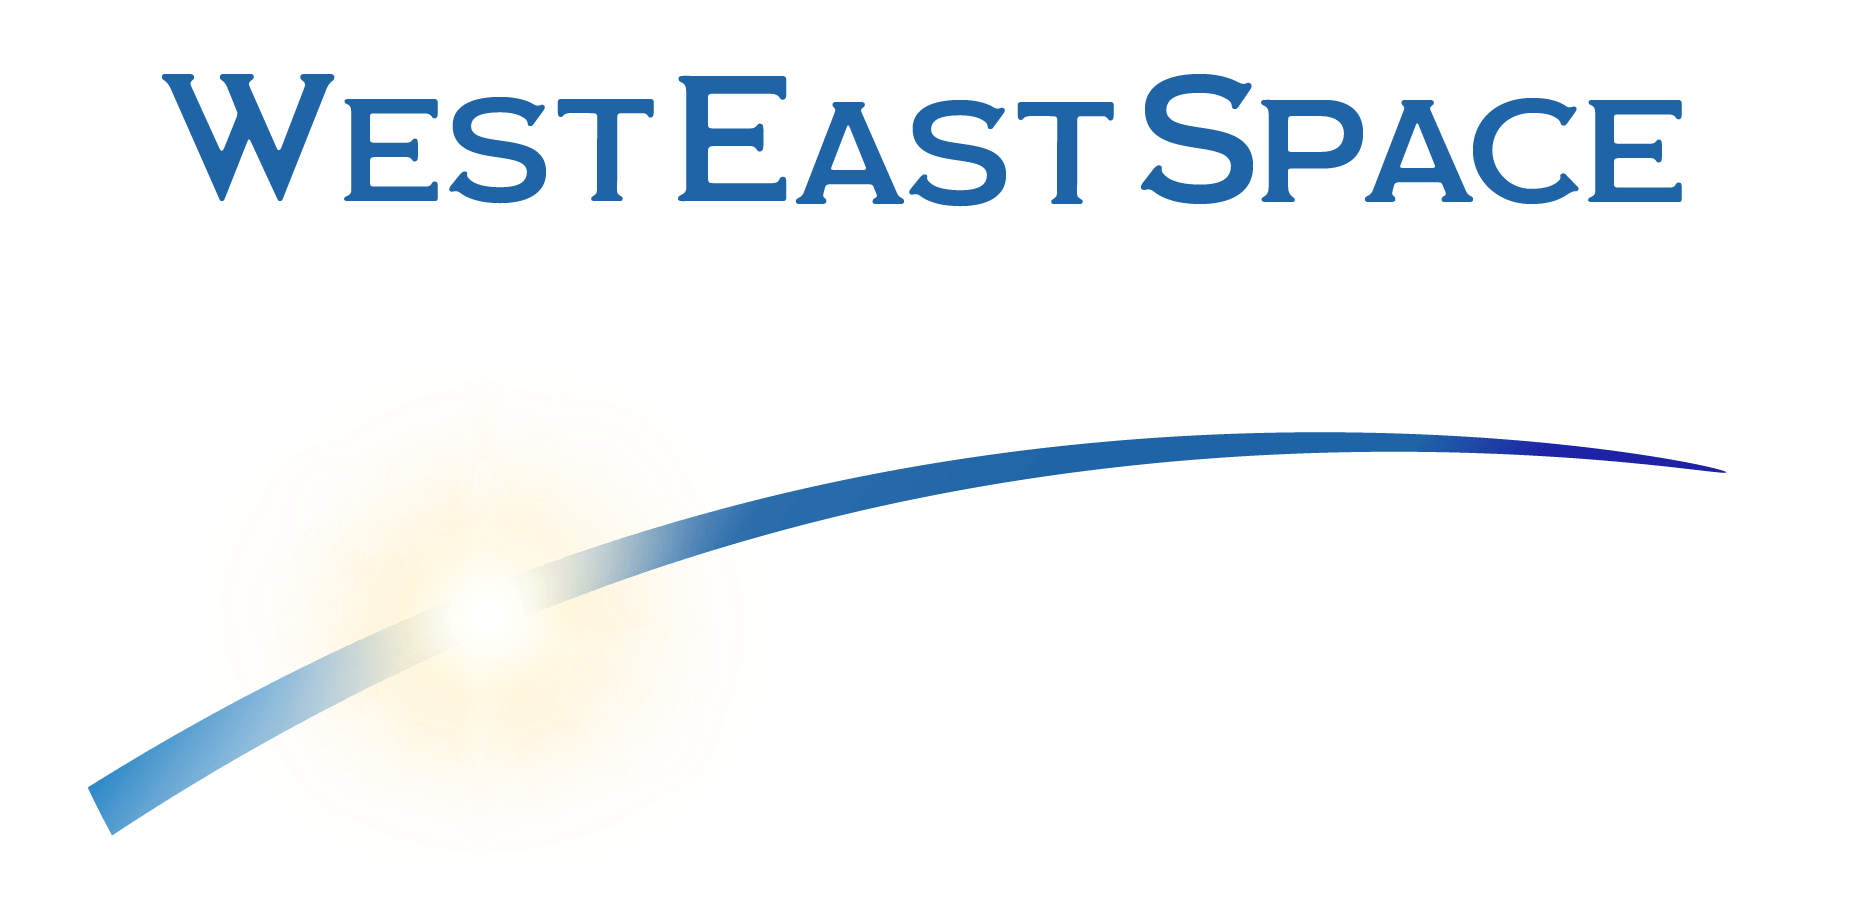 West East Space